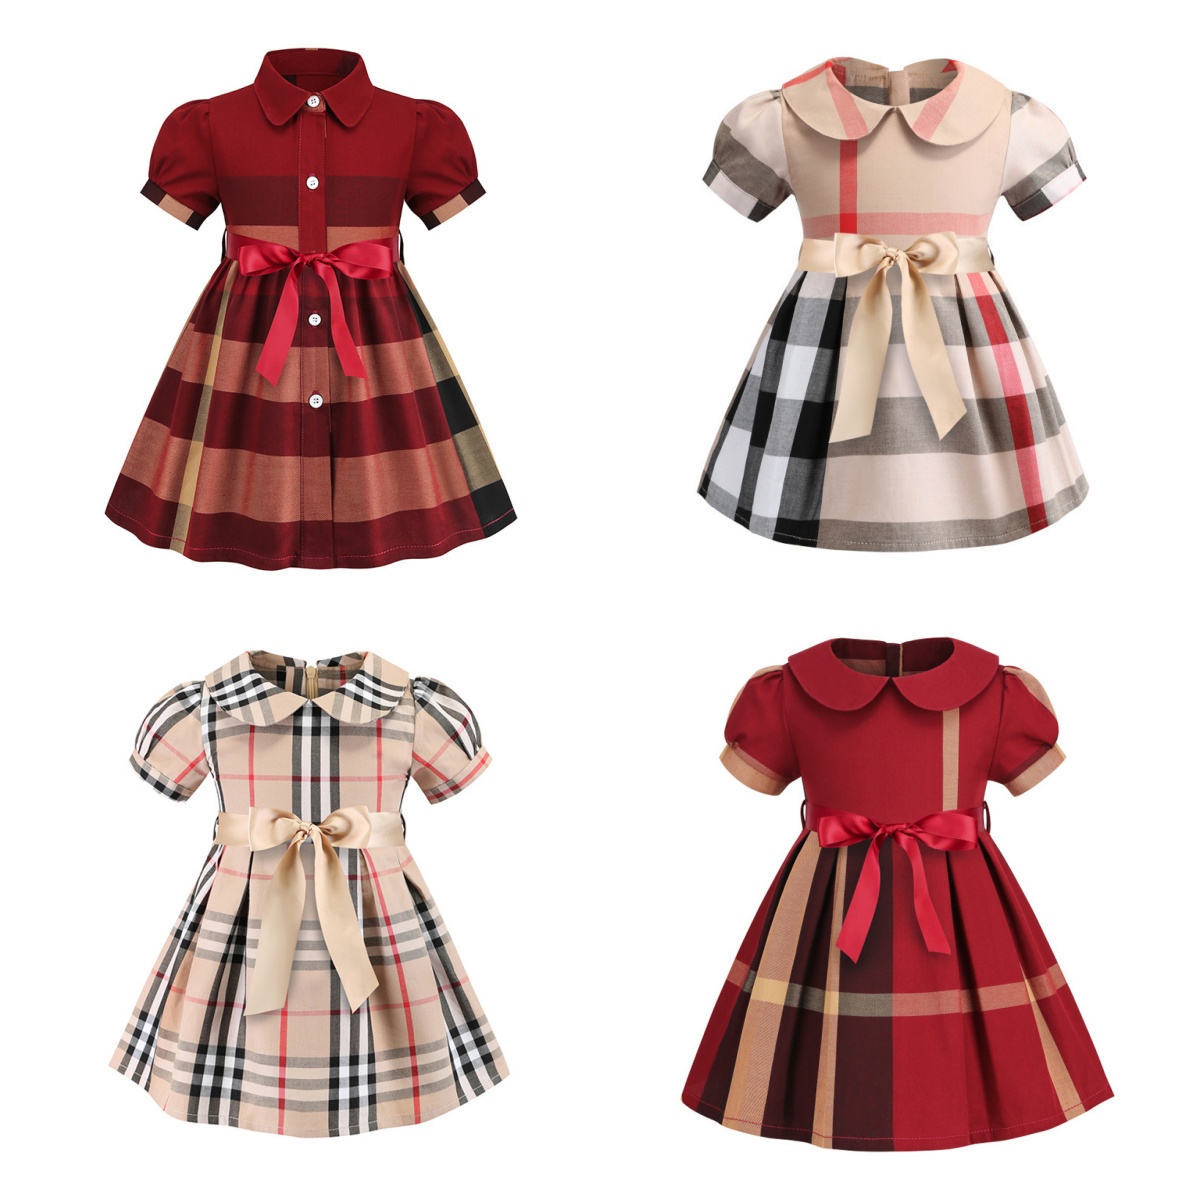 4 Style Summer Summer Plaid Girls Dress Children Clasly Fashion Party A-Line Discal Dress Dress Obsy 1-7t